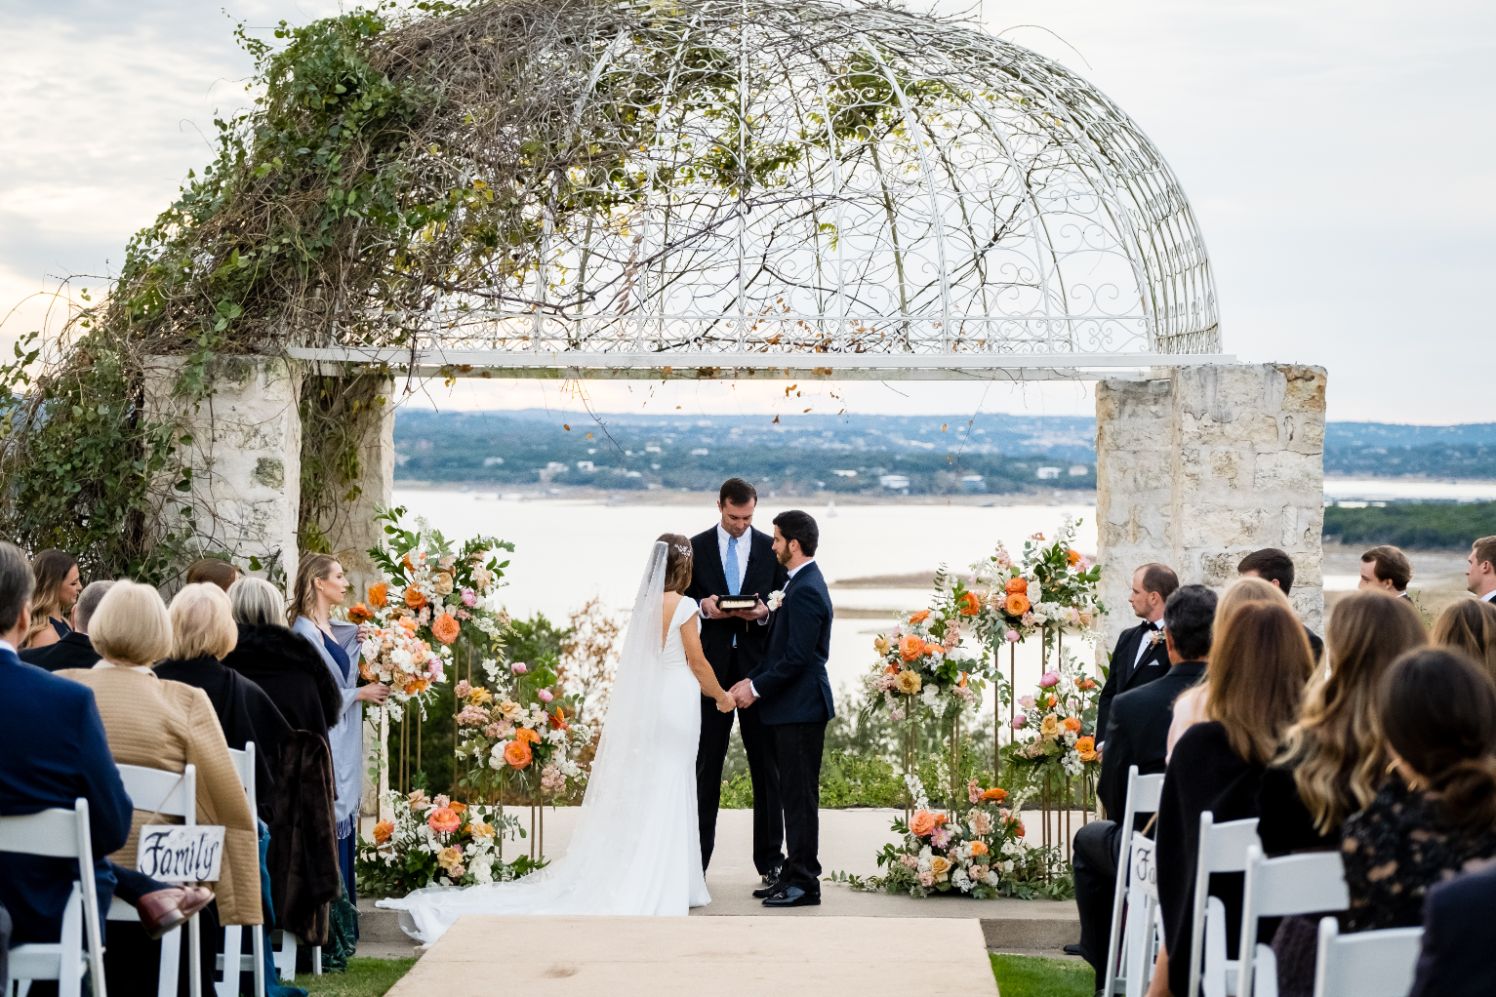 Bride and groom hold hands at the altar of their wedding ceremony at Vintage Villas in Austin, Texas. Wedding guest sit in white chairs and an officiant is speaking behind the couple. Lake Travis can be seen in the distance.